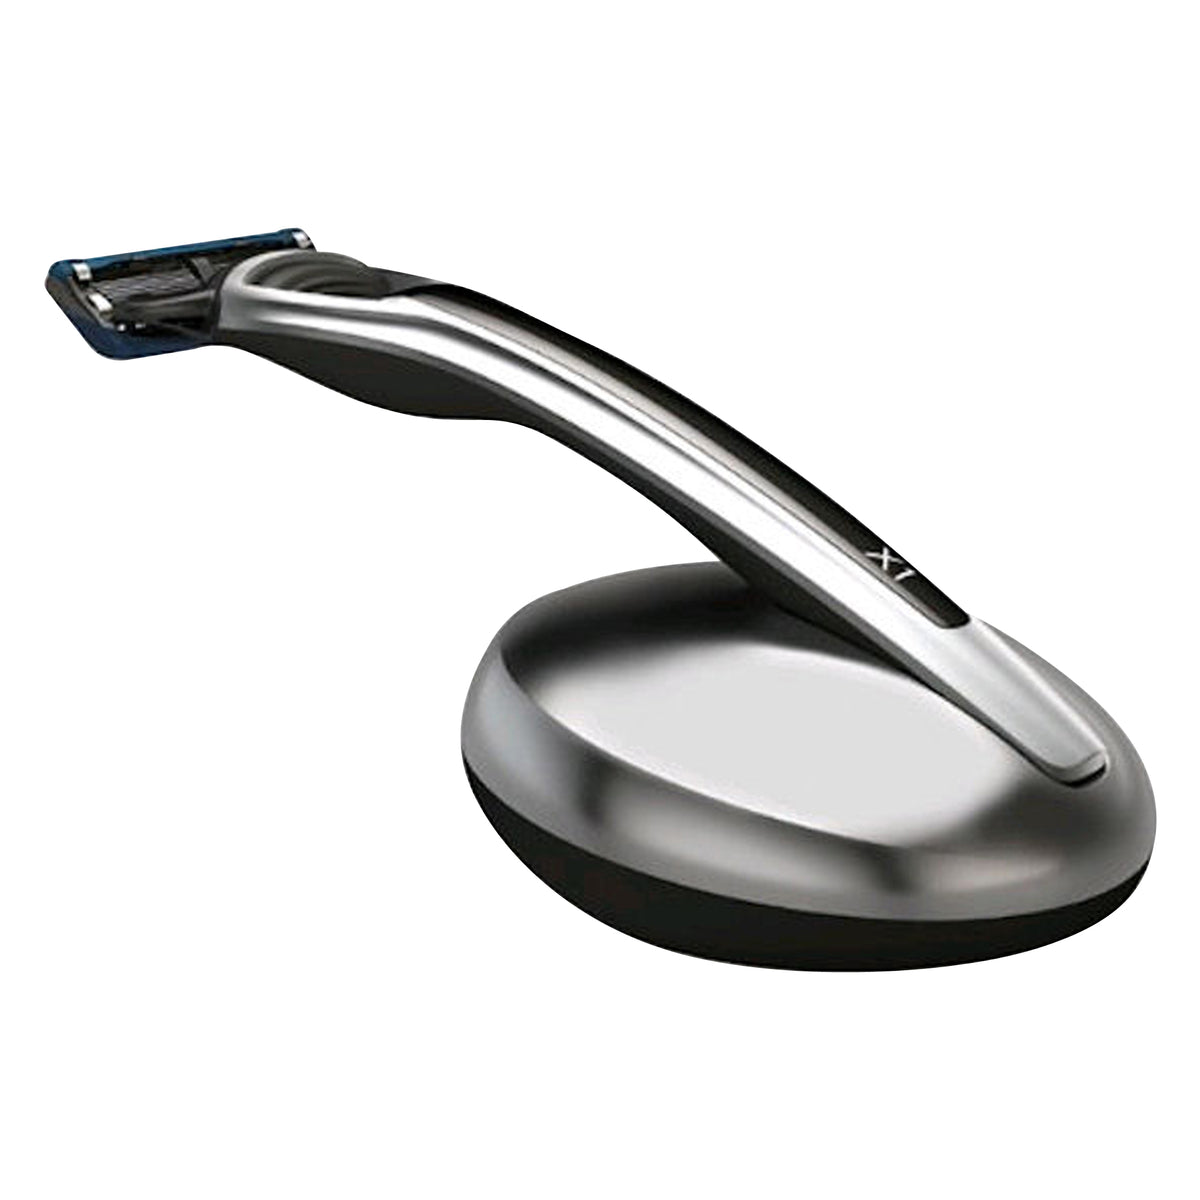 X1 Argent Black Fusion Razor and Stand